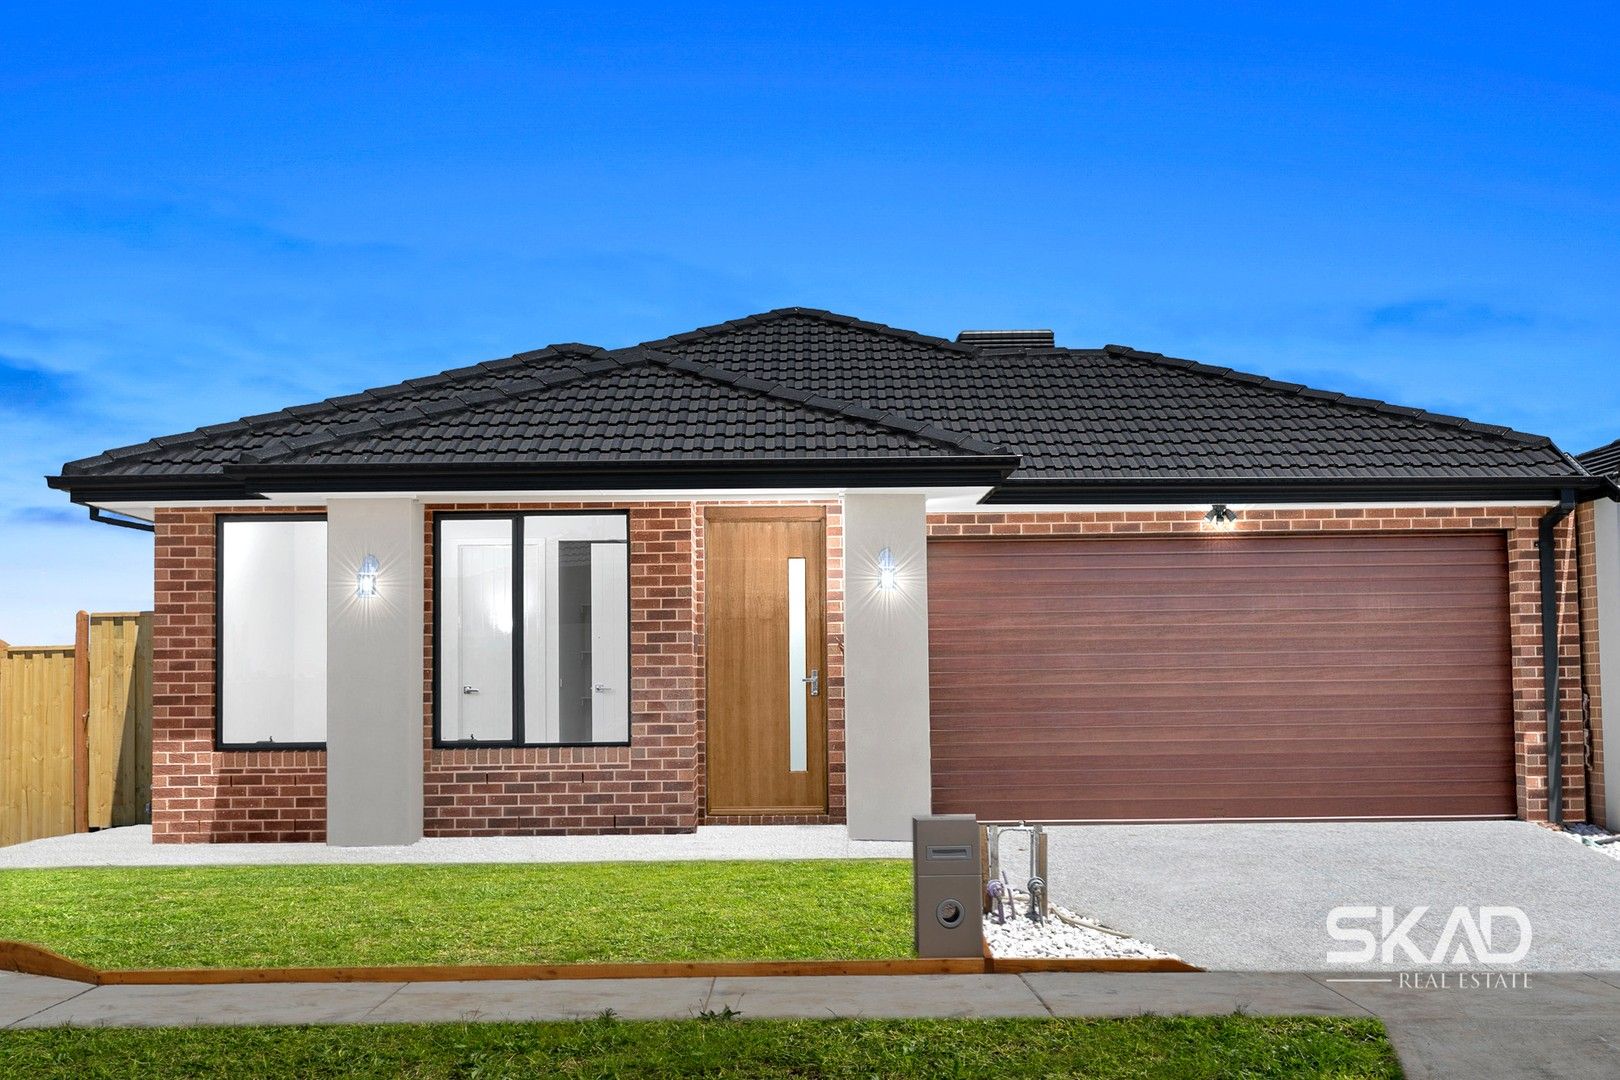 4 bedrooms New House & Land in 10 Referee Way TARNEIT VIC, 3029